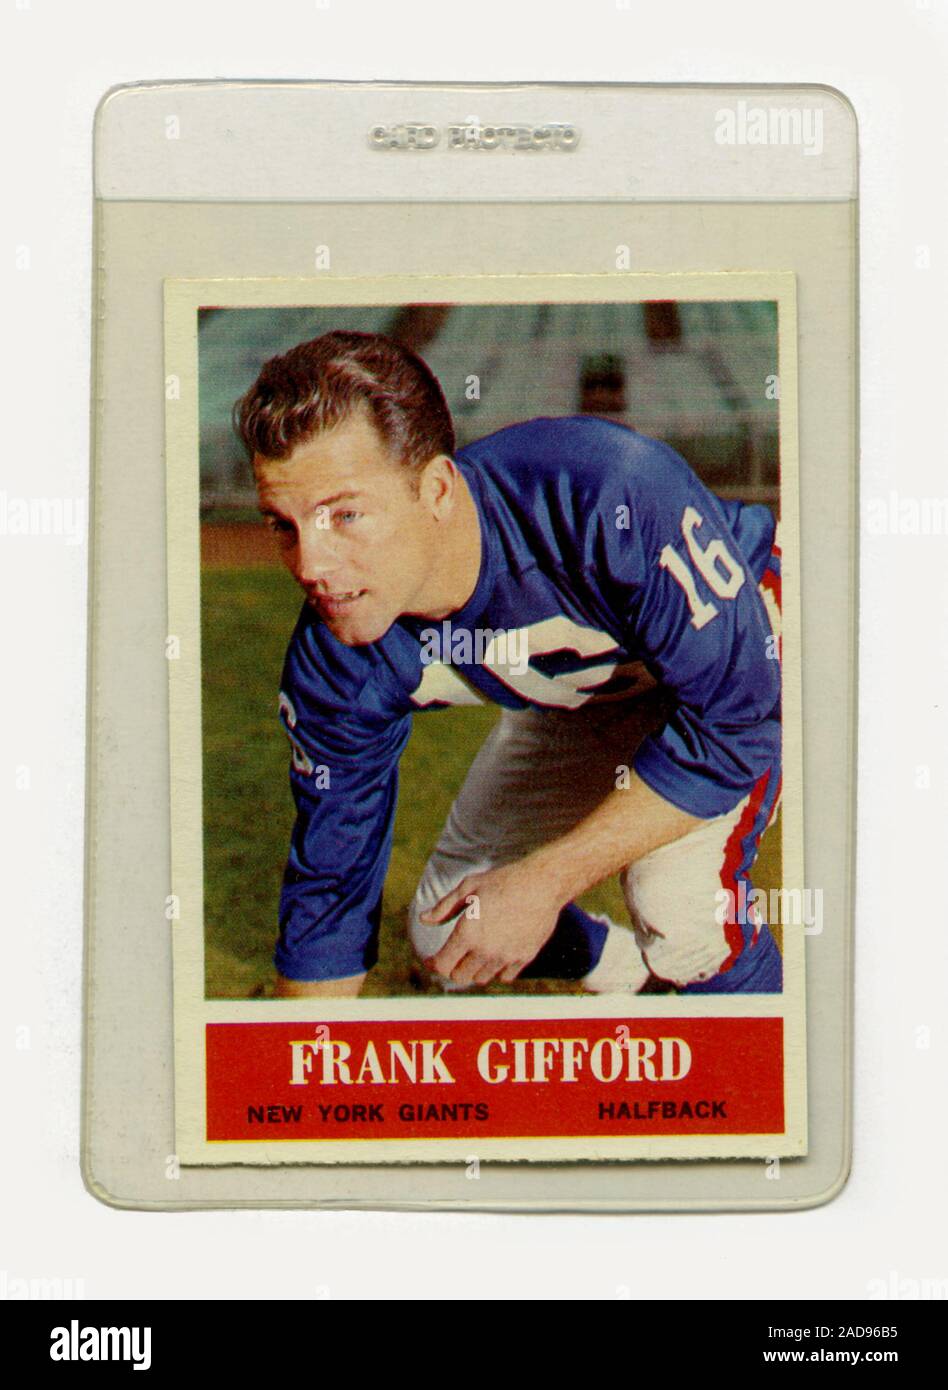 Vintage football card of Frank Gifford who was a halfback with the New Y .ork Giants of the NFL issued by Philadelphia Gum in 1964. Gifford later worked as a broadcaster. Stock Photo